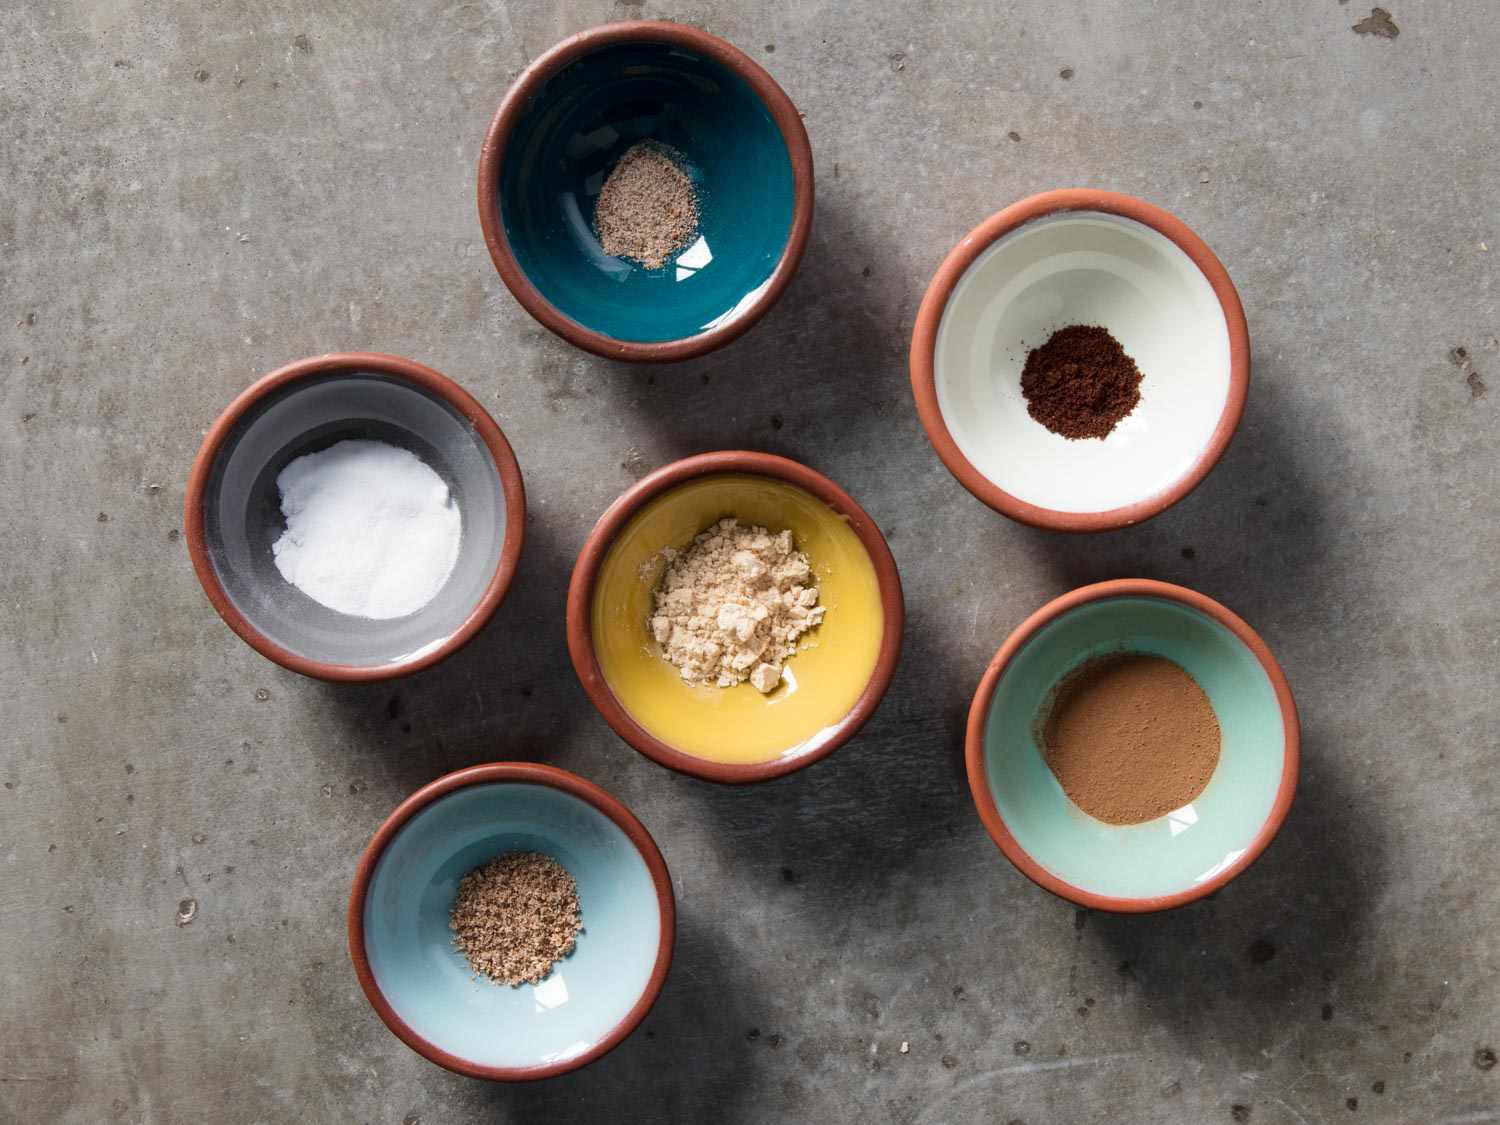 six small bowls holding various ground spices.